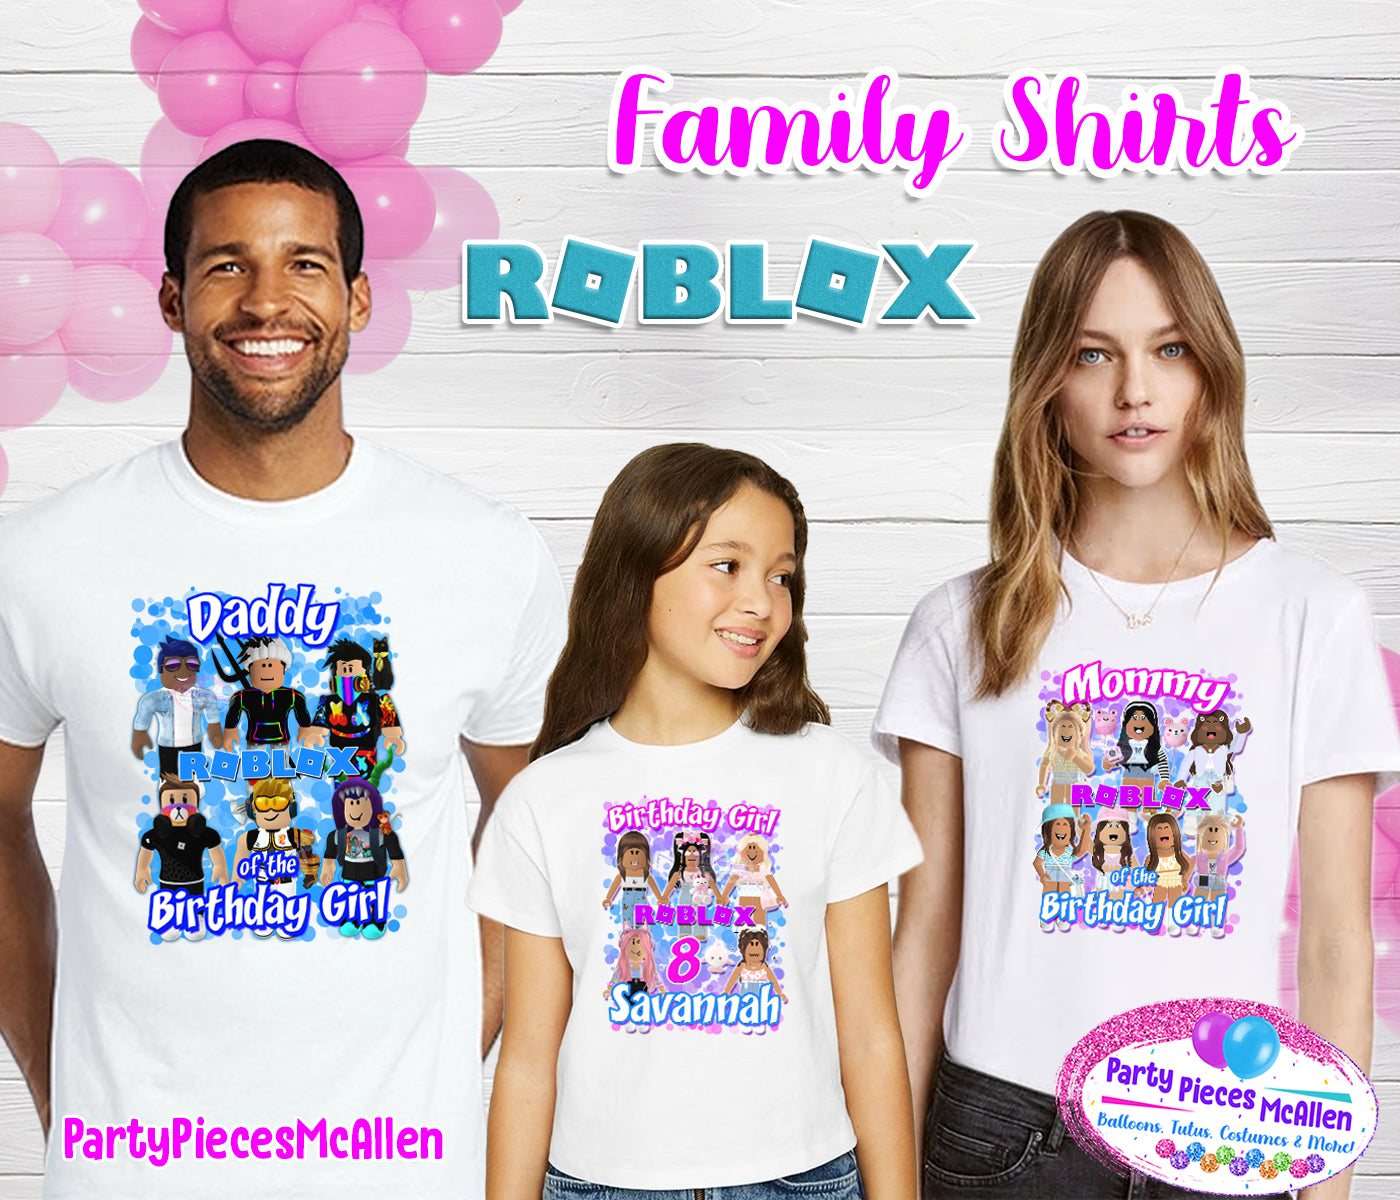 Roblox Face 7 Girl Character T-Shirt, Children Costume Shirts, Kids Outfit  ~